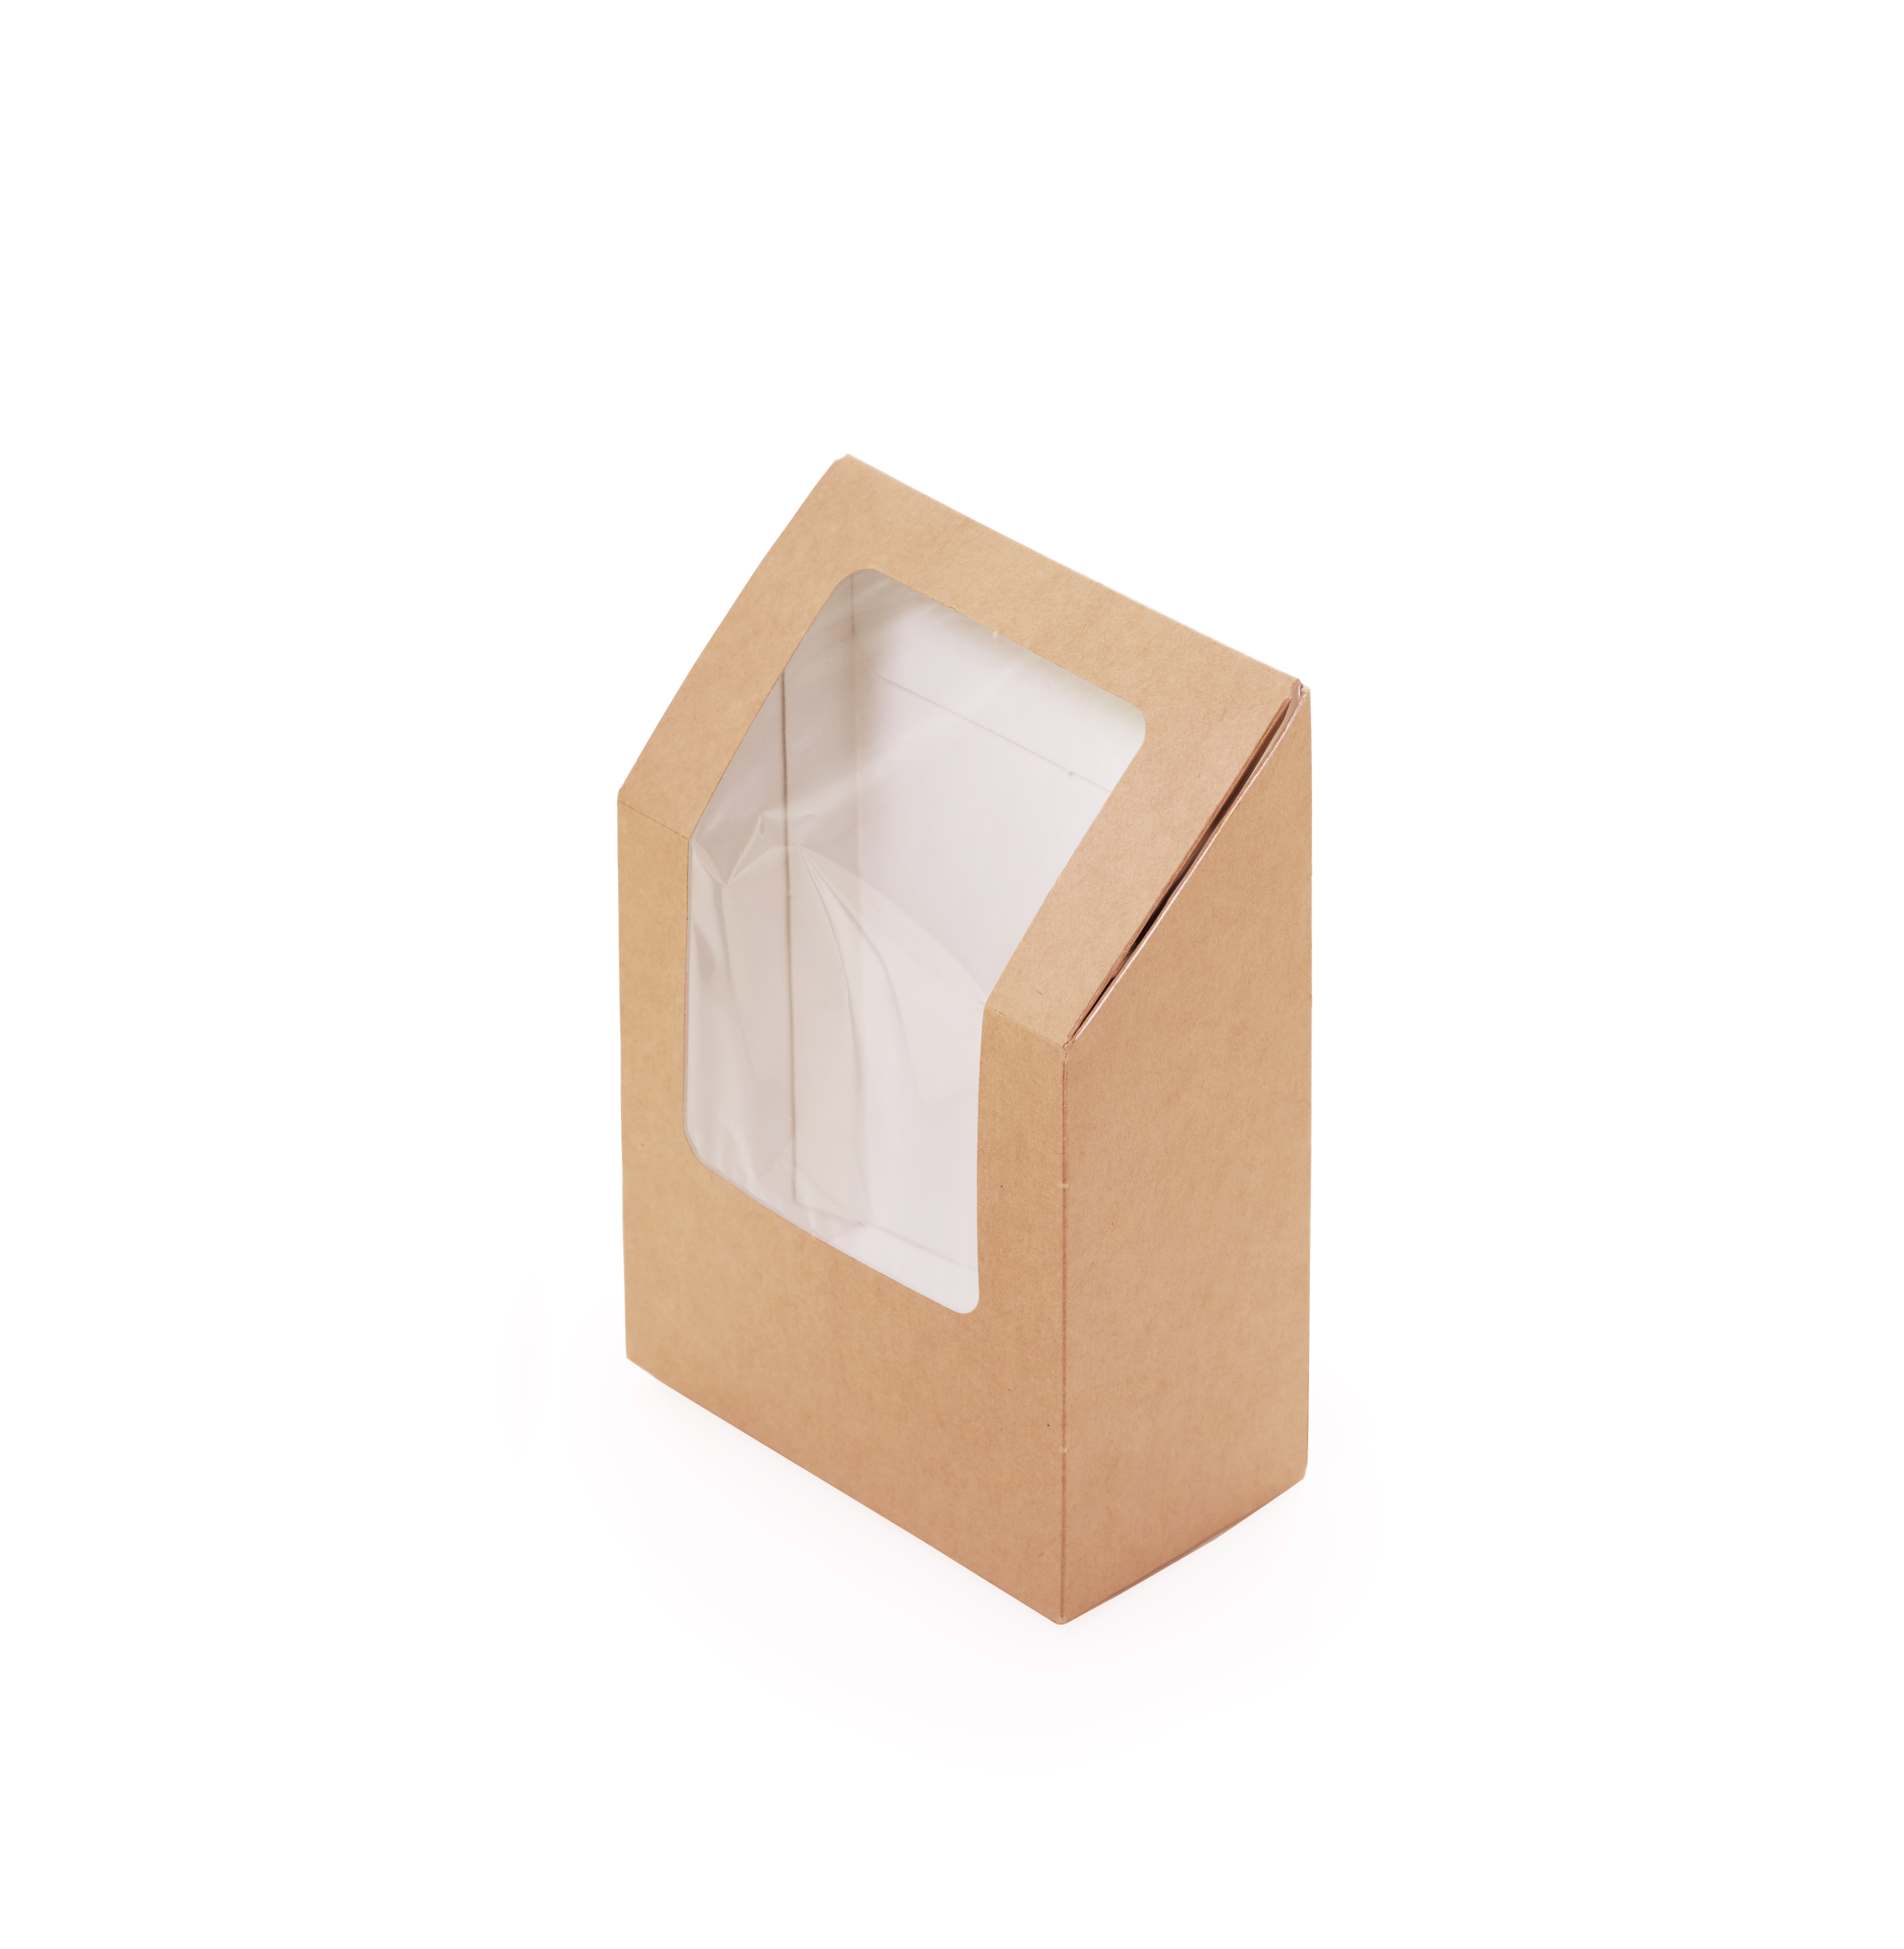 OSQ ROLL packaging for rolls